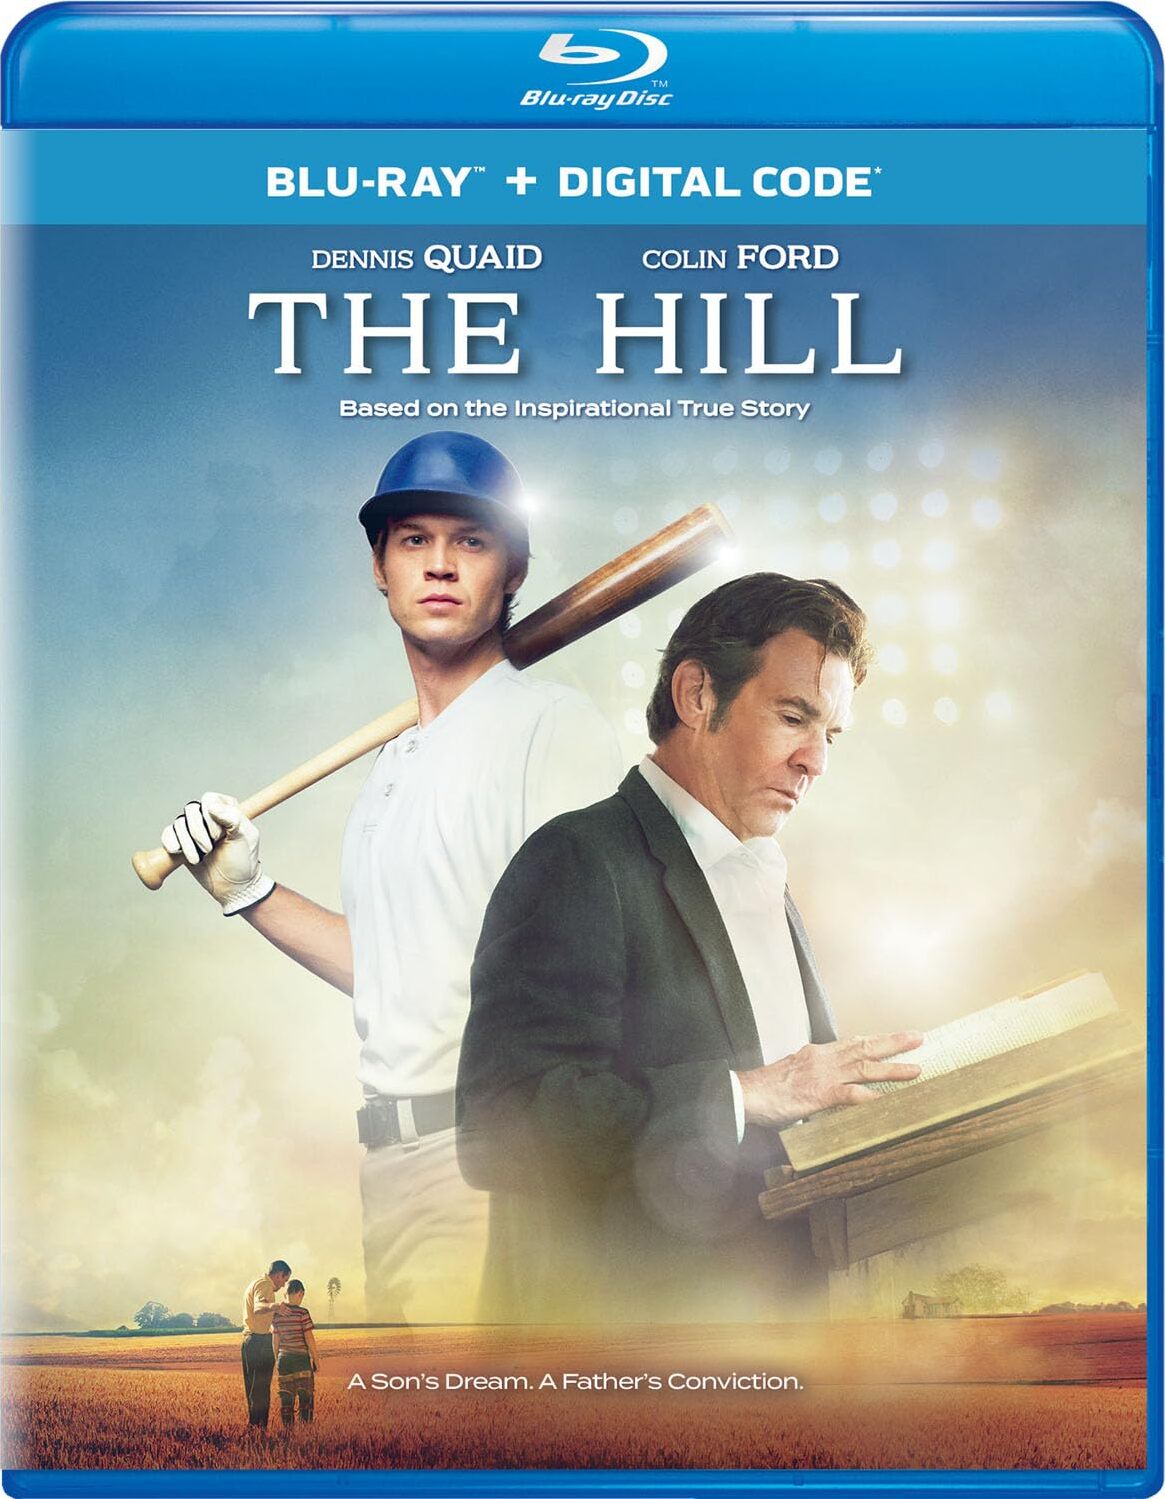 King of the Hill [Criterion Collection] [Blu-ray/DVD] [1993] - Best Buy